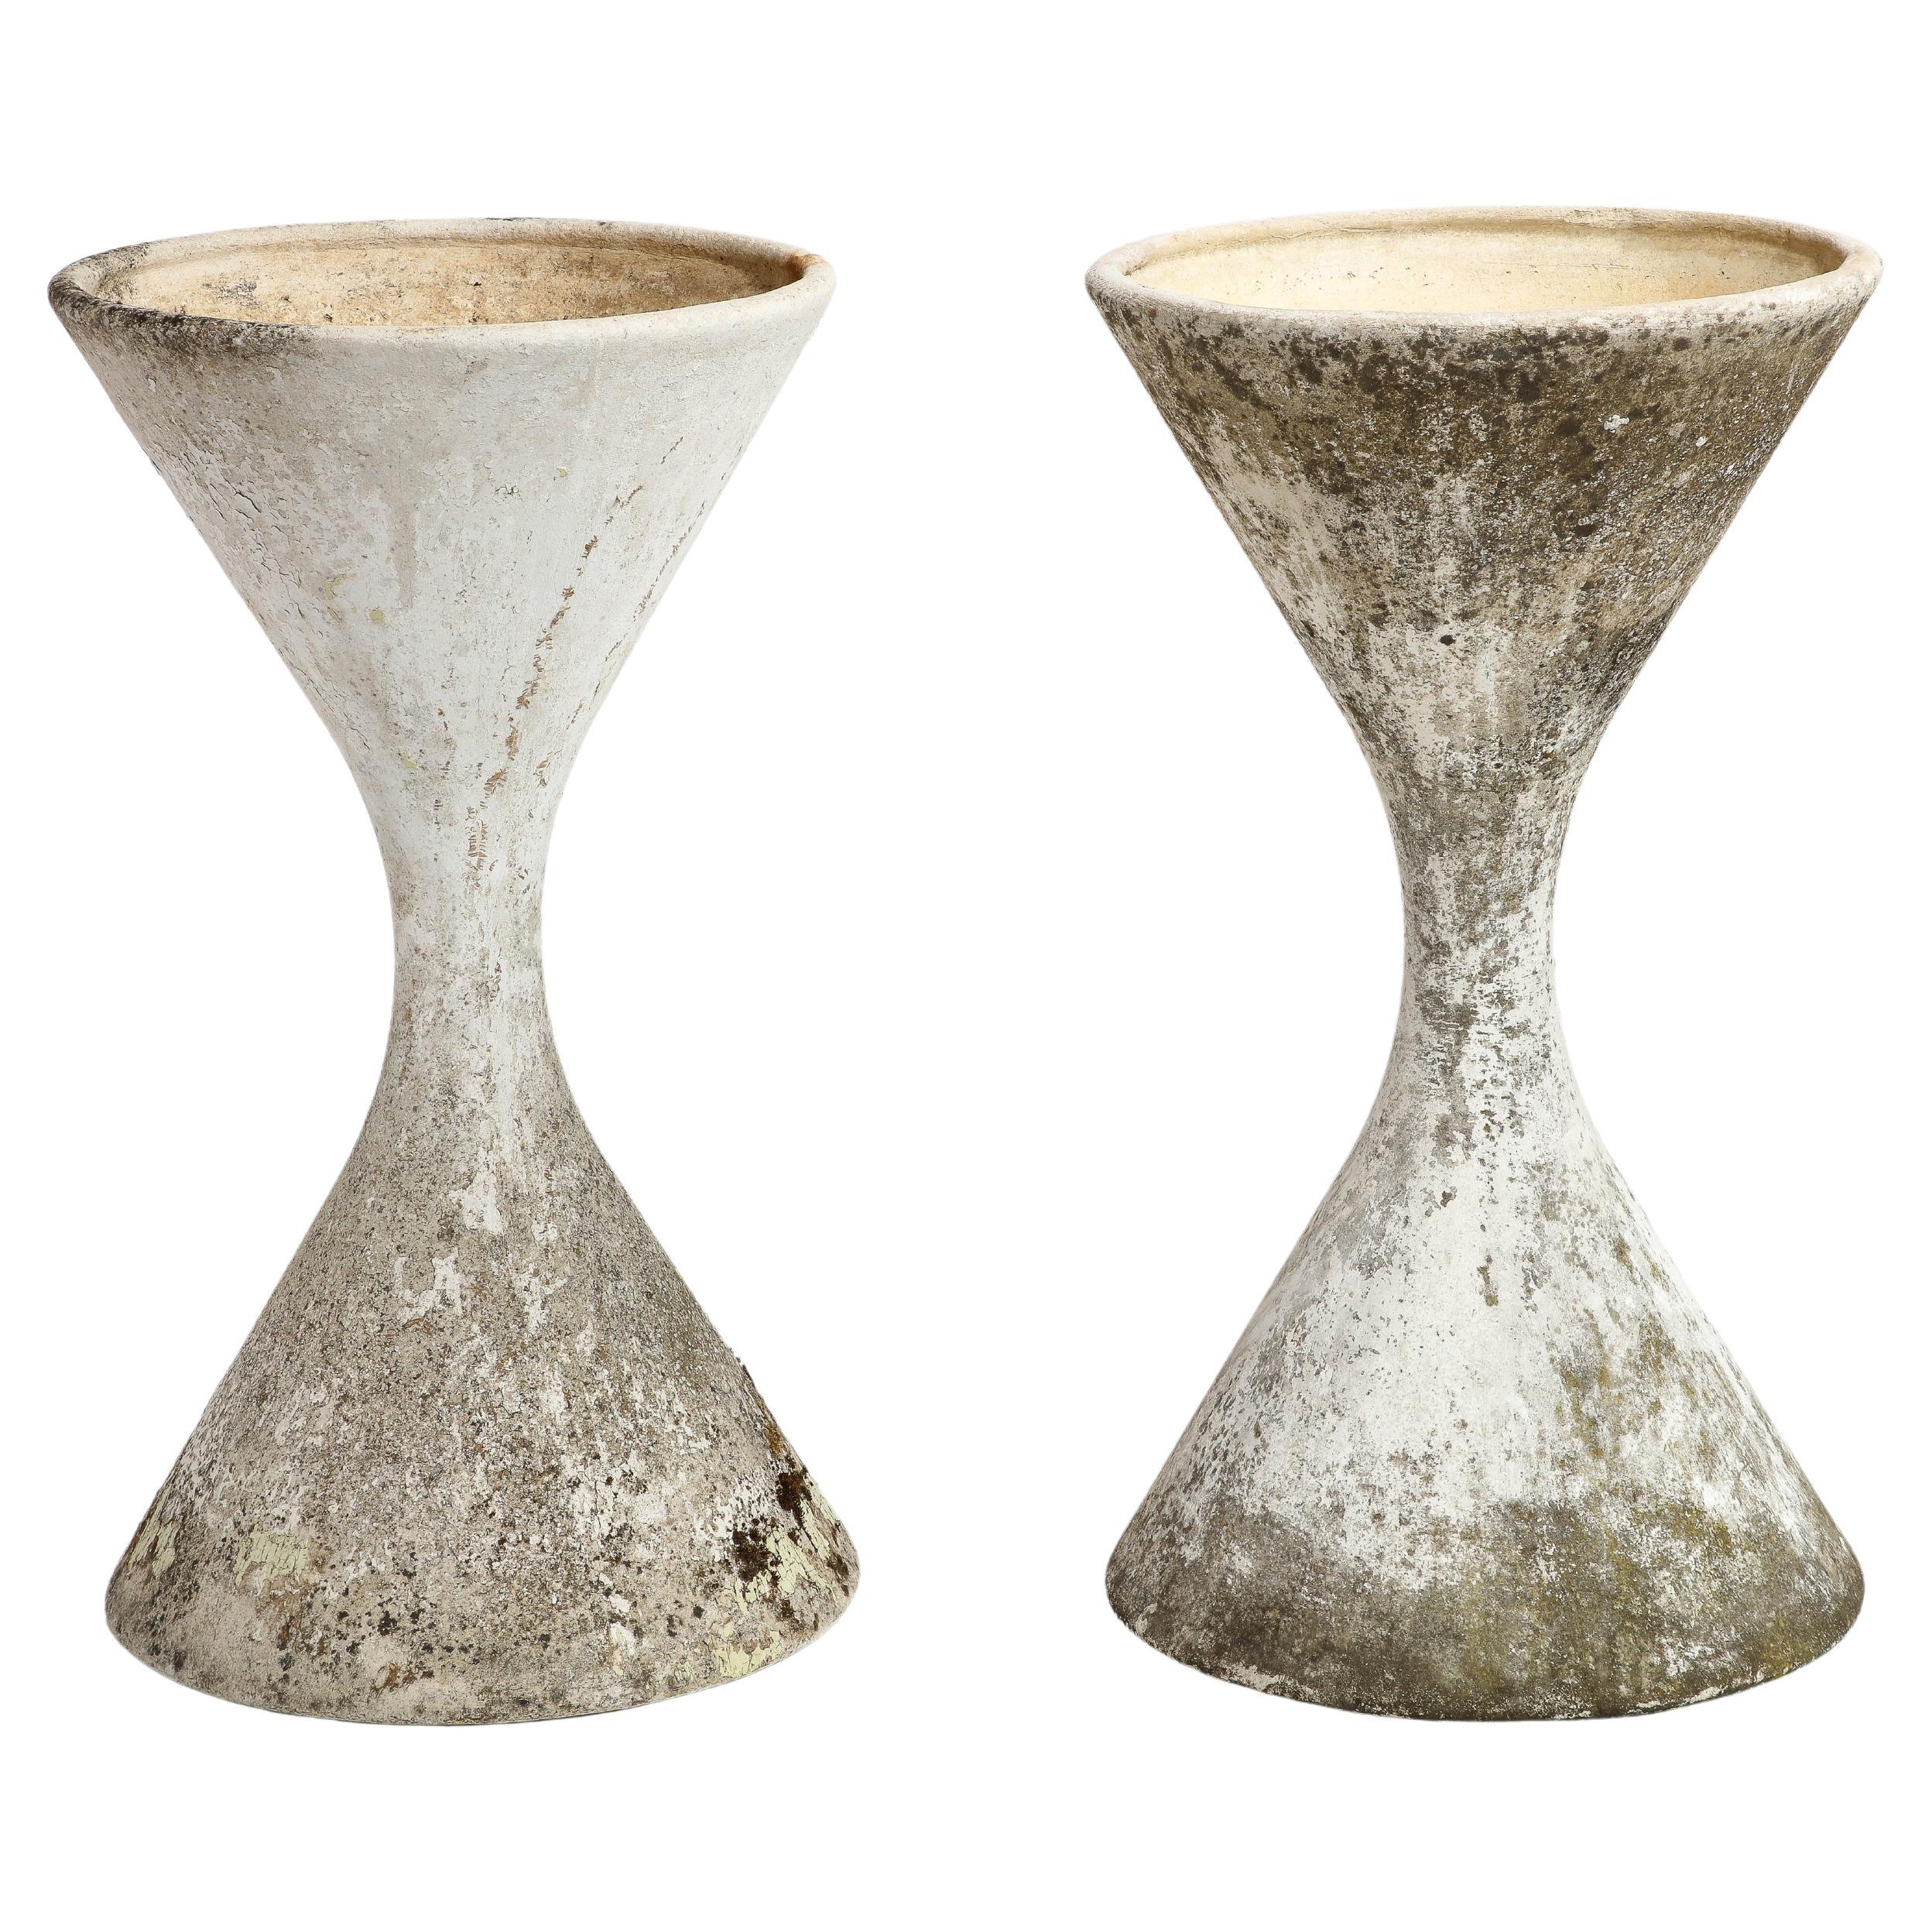 Willy Guhl for Eternit Large Concrete Diabolo Spindel Planters, 1960s For Sale